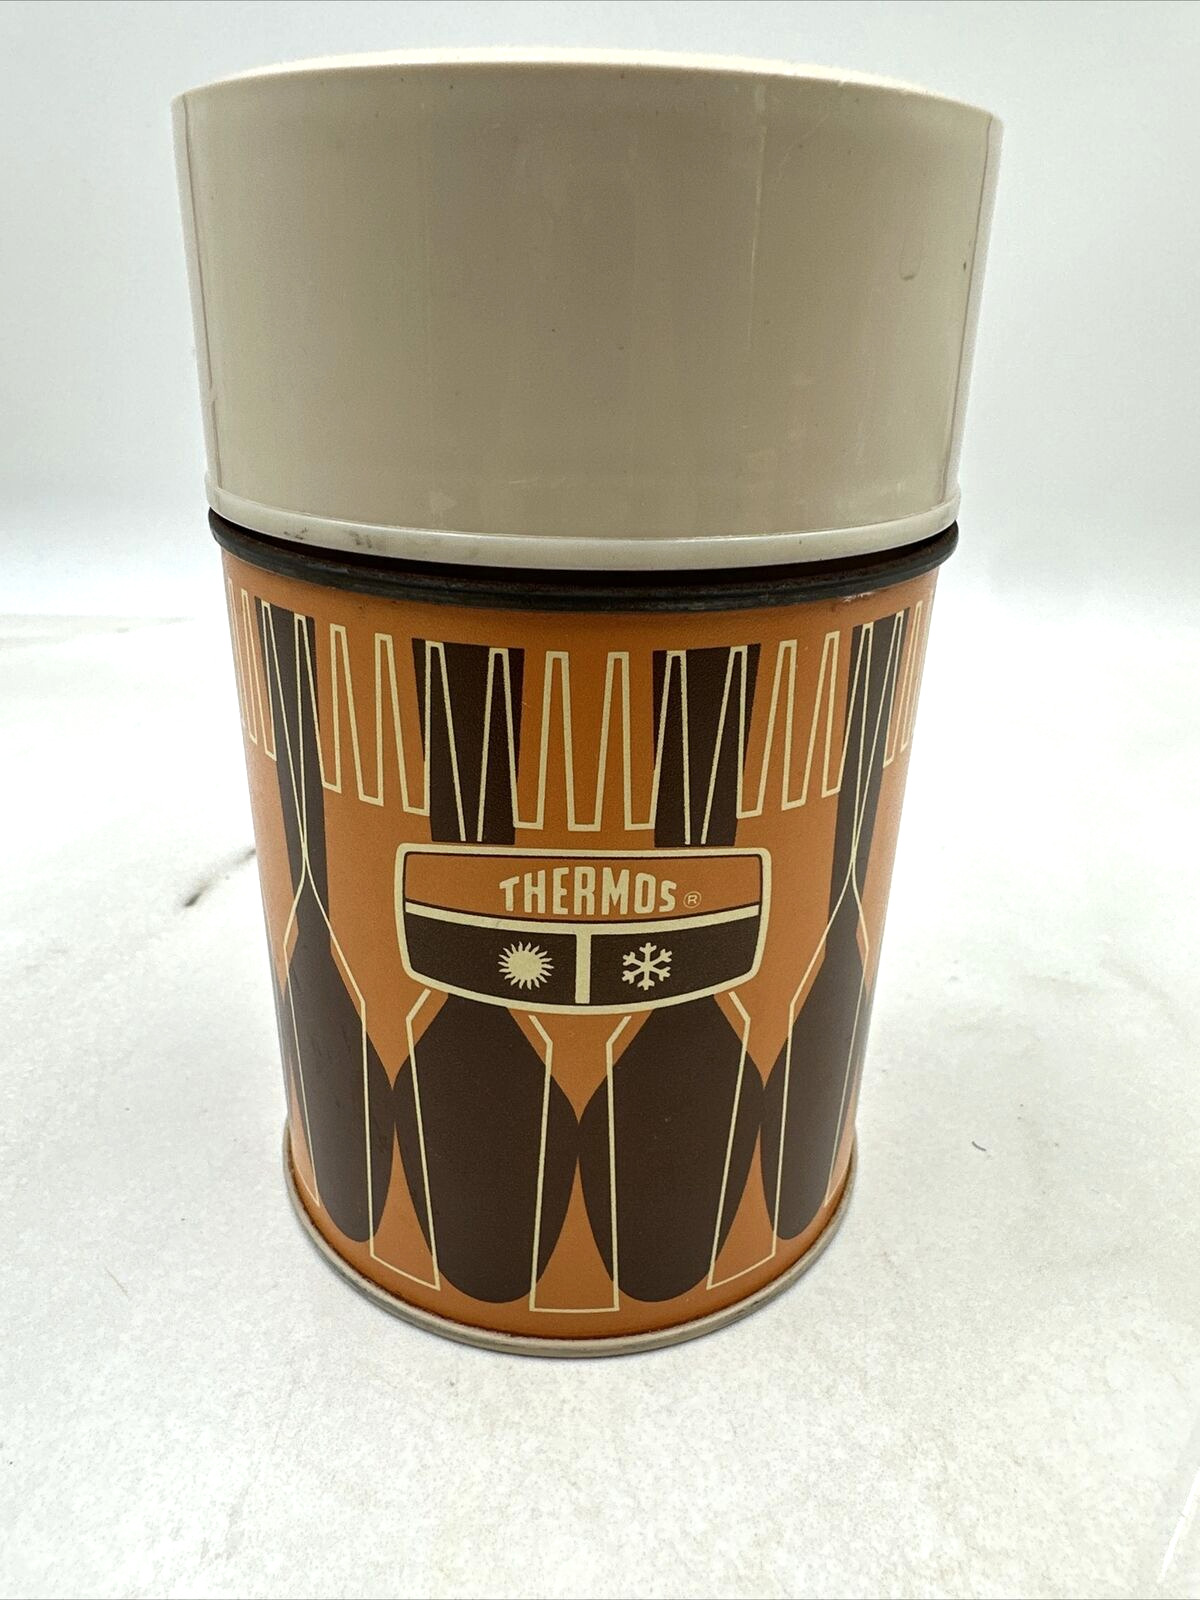 1971 King-Seeley Thermos Co. Bottle No. 7063 10 Oz. Size Cup Hot/Cold Vintage